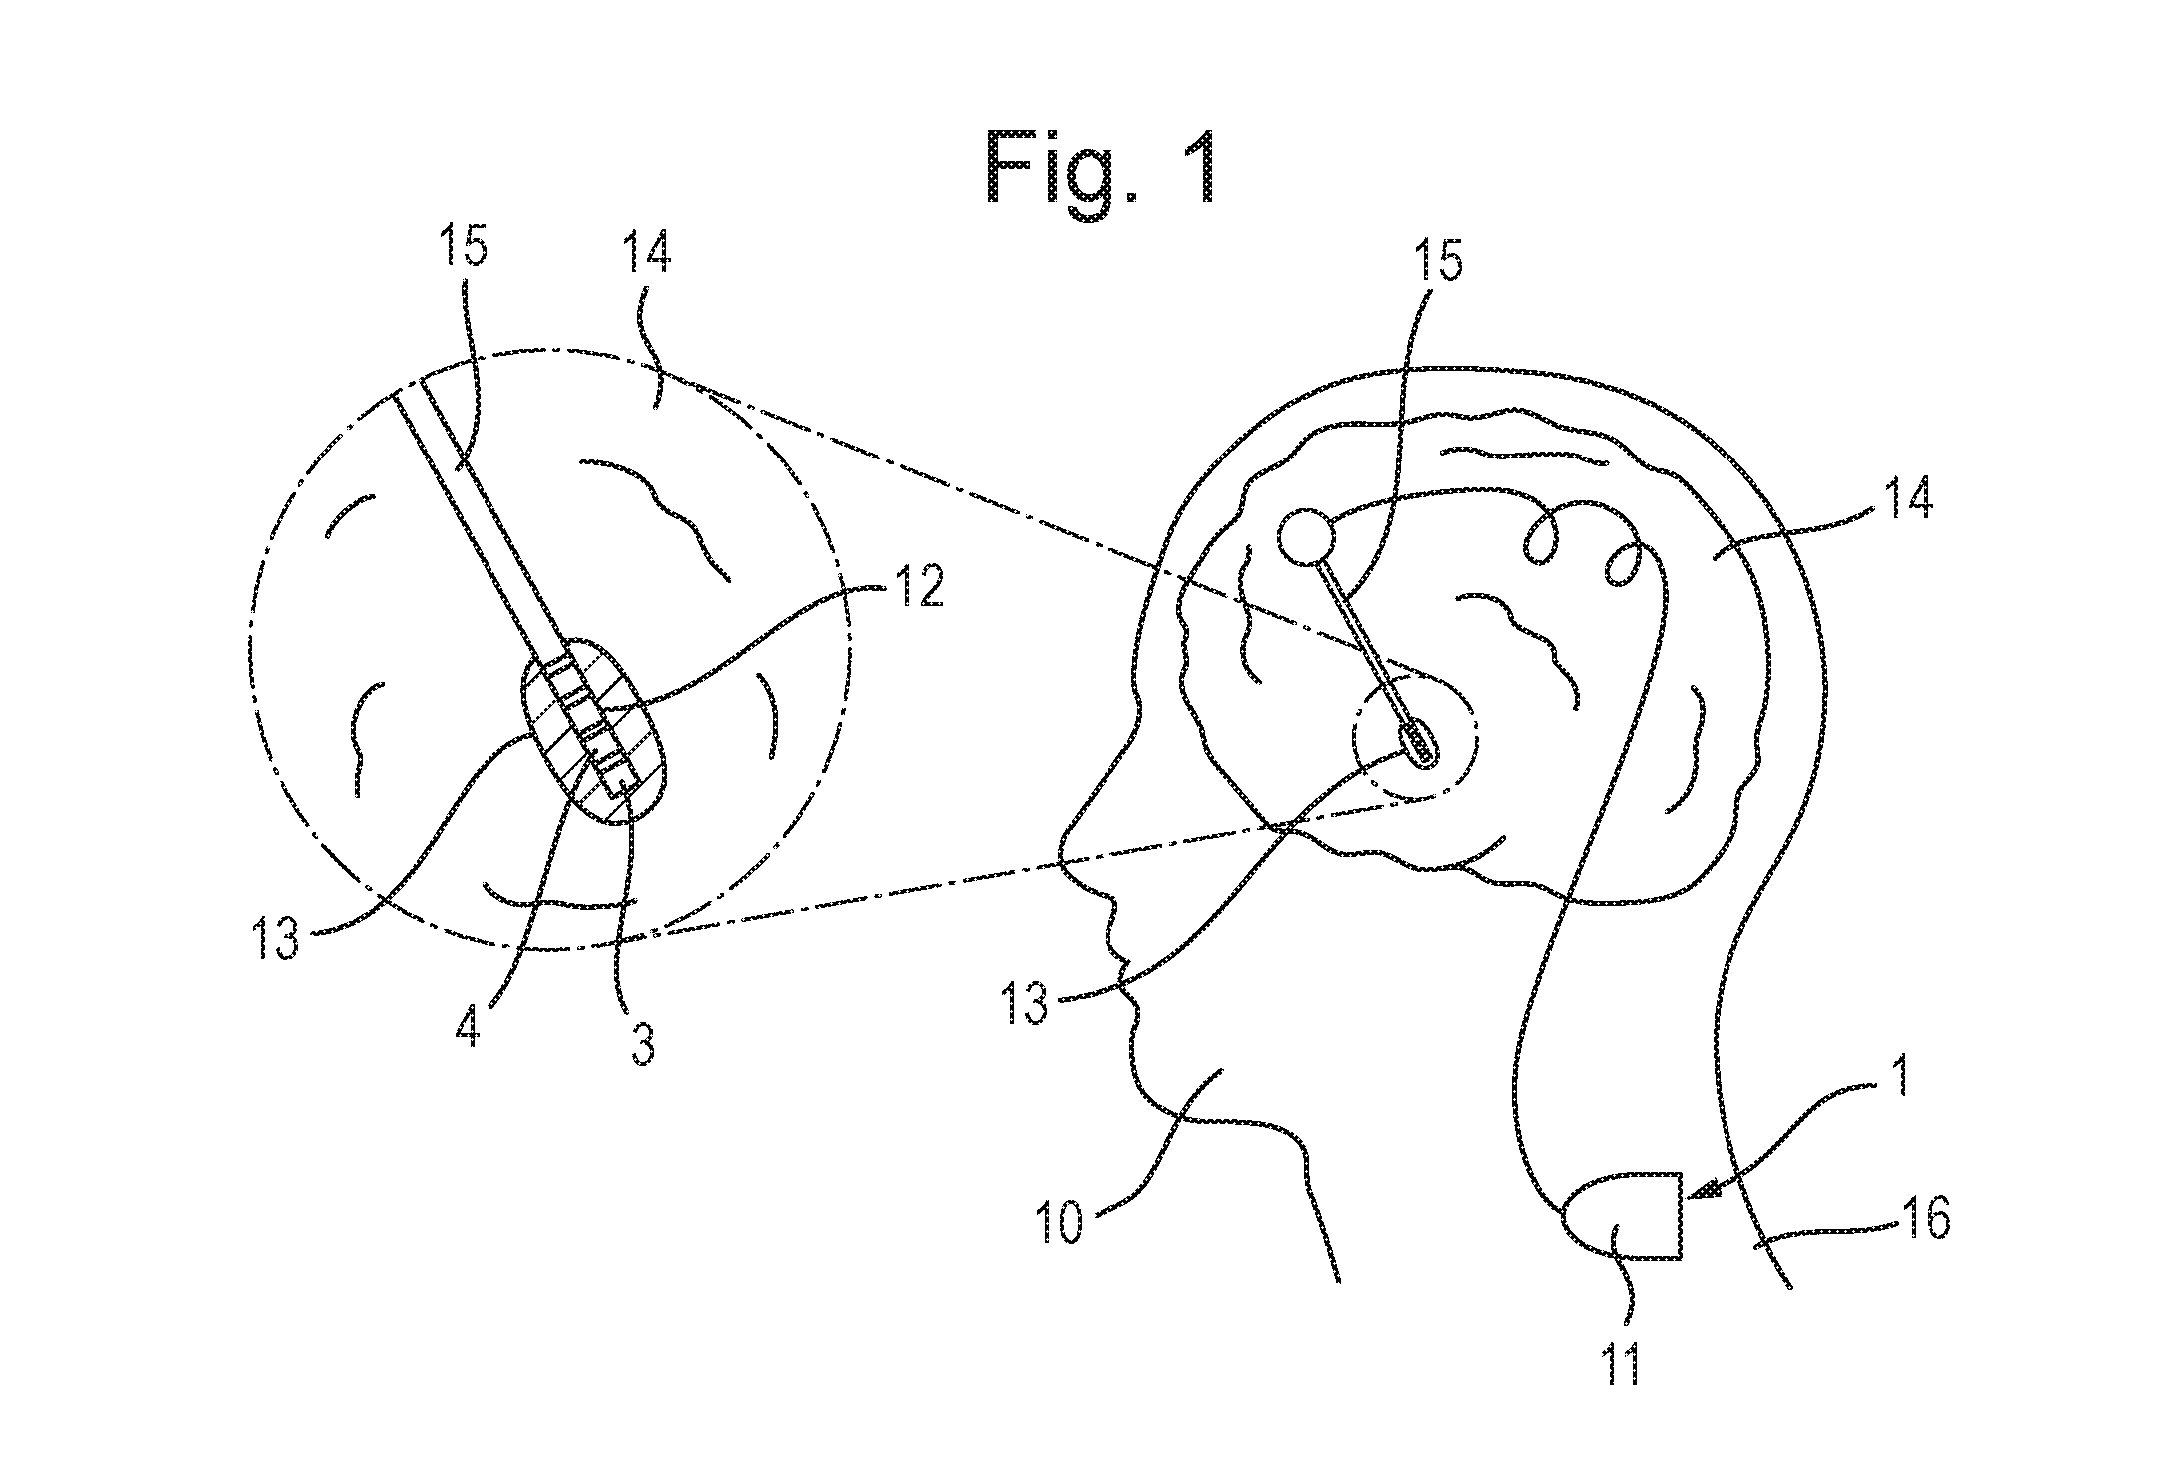 Diagram from the patent showing an electrode implanted in a human subject